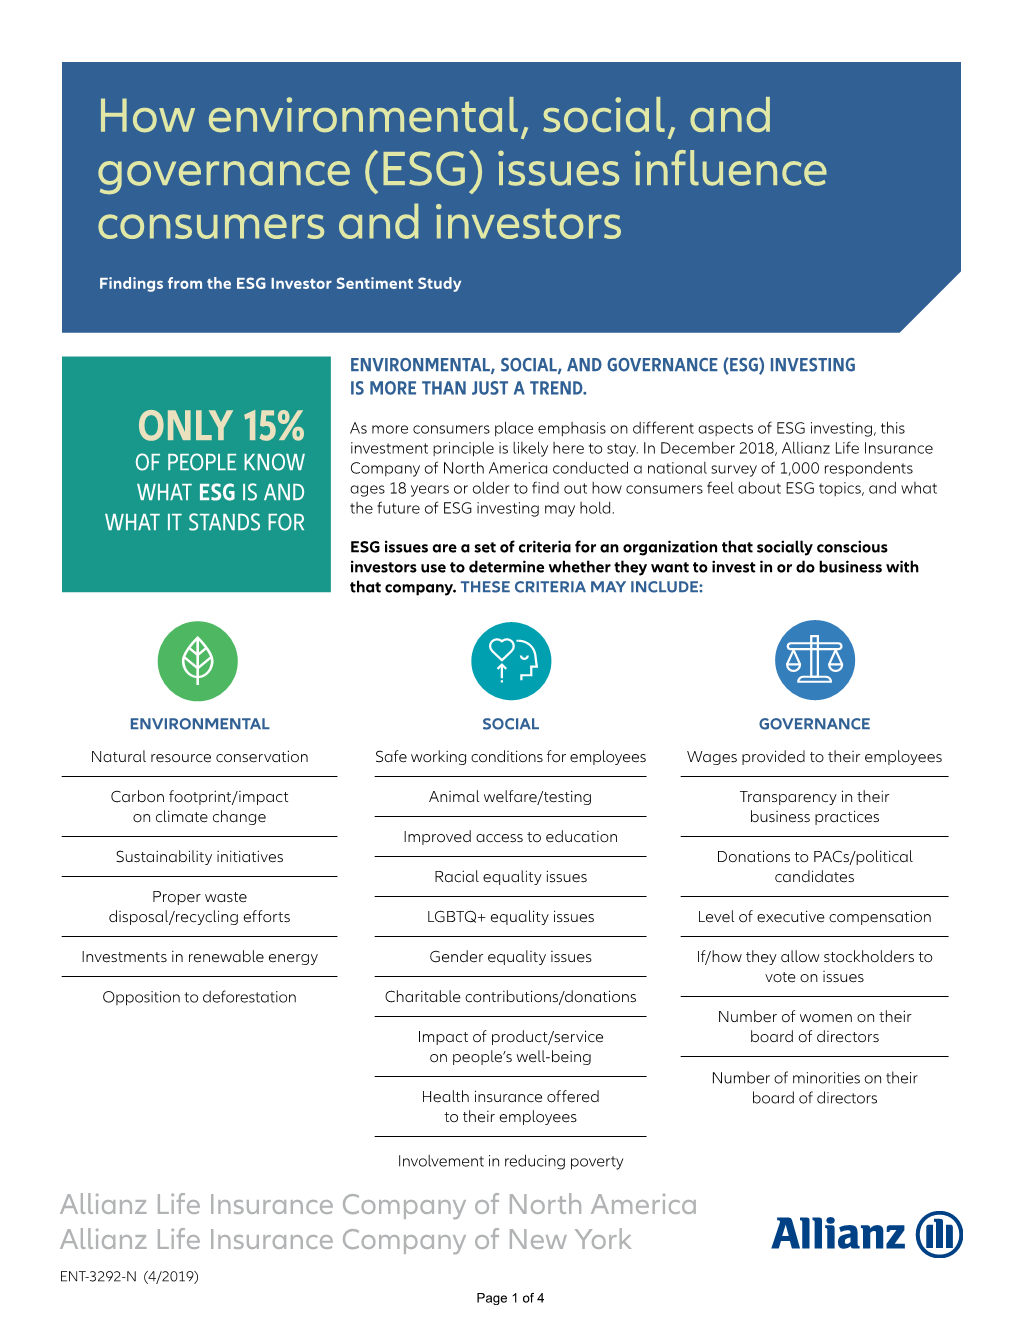 How Environmental, Social, and Governance (ESG) Issues Influence Consumers and Investors